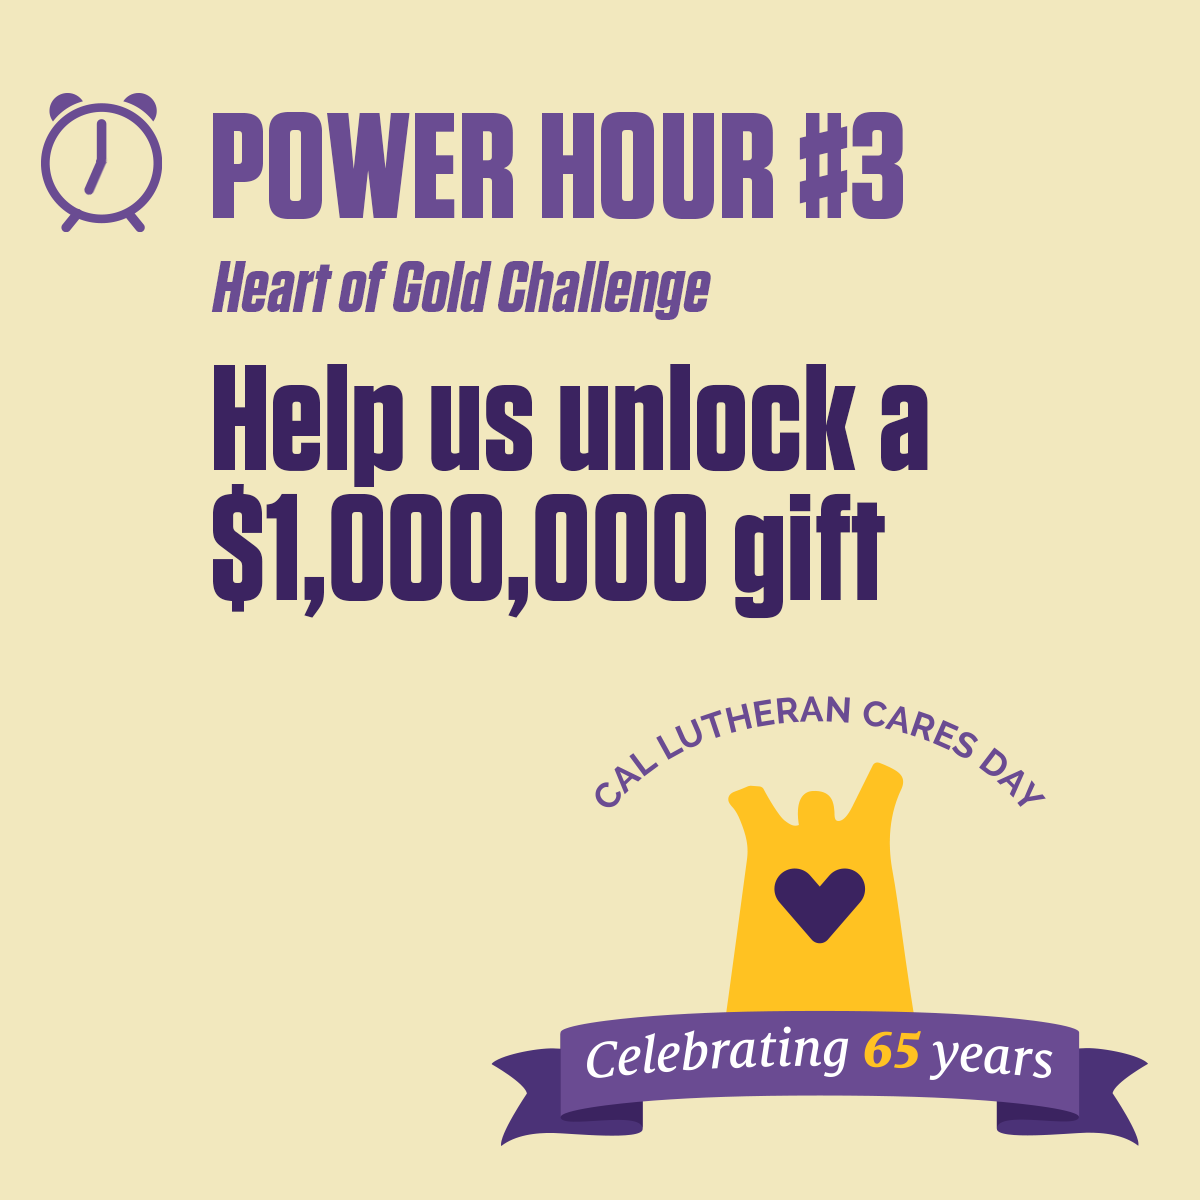 Help us meet the Heart of Gold Challenge! 💛 We’re aiming for $650,000 on the leaderboard by midnight to unlock a $1 million anonymous gift! Give now at caresday.CalLutheran.edu #CalLutheranCares